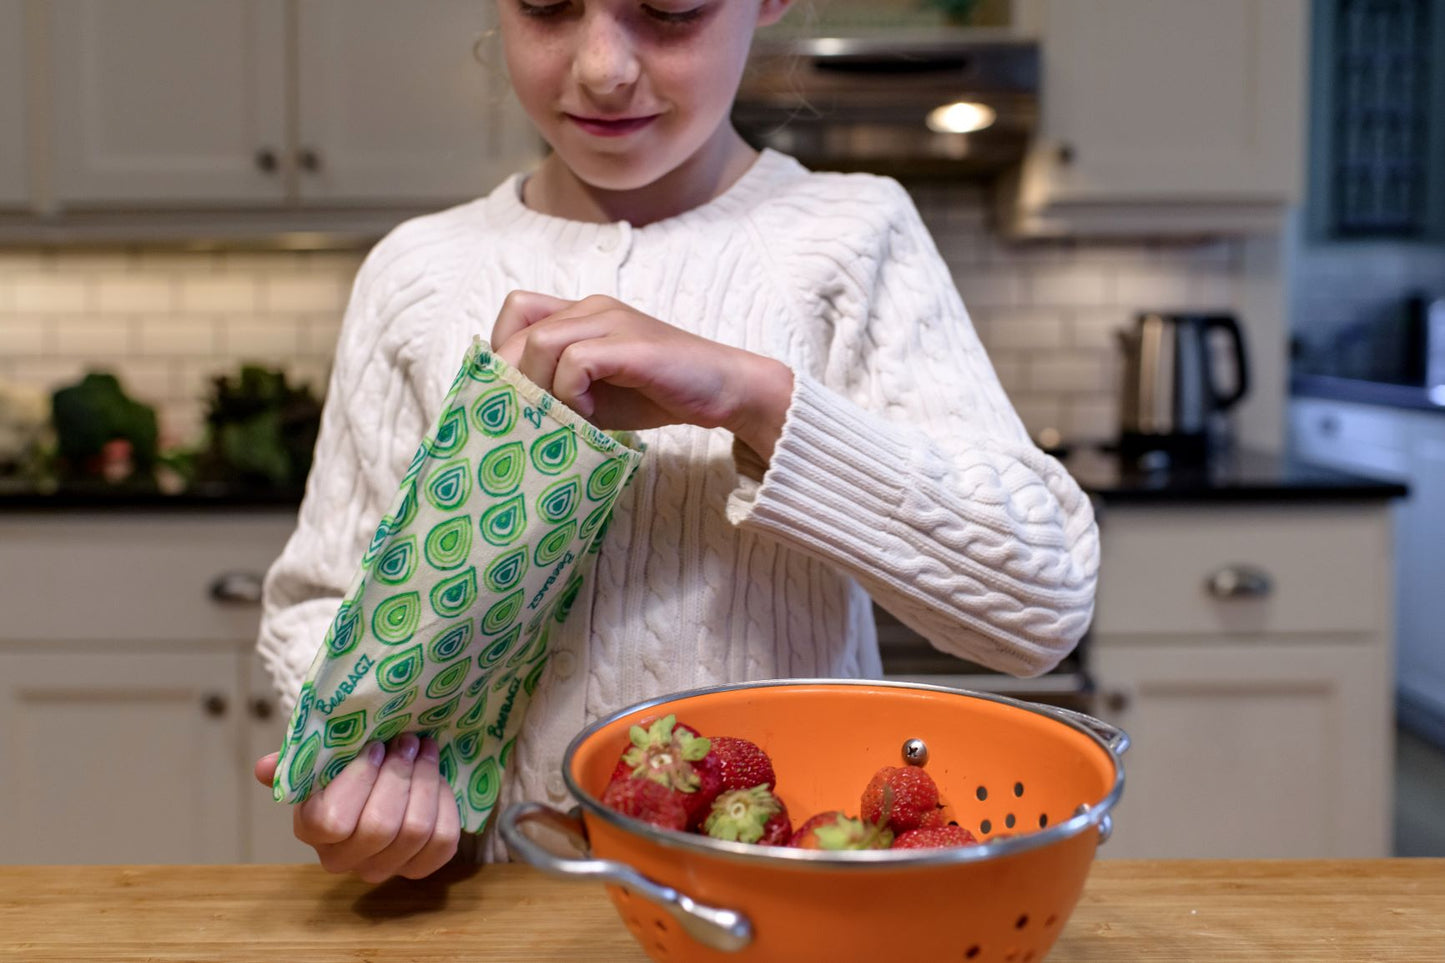 Beeswax wrap and reusable food storage bags by BeeBAGZ are a plastic free alternative to plastic wraps & ziplocked bags for your food storage needs. These beeswax wraps and beeswax wrap bags are a great eco friendly gift and can be used as food wraps, produce bags, snack bags, lunch bags or sandwich bags. Shop today!